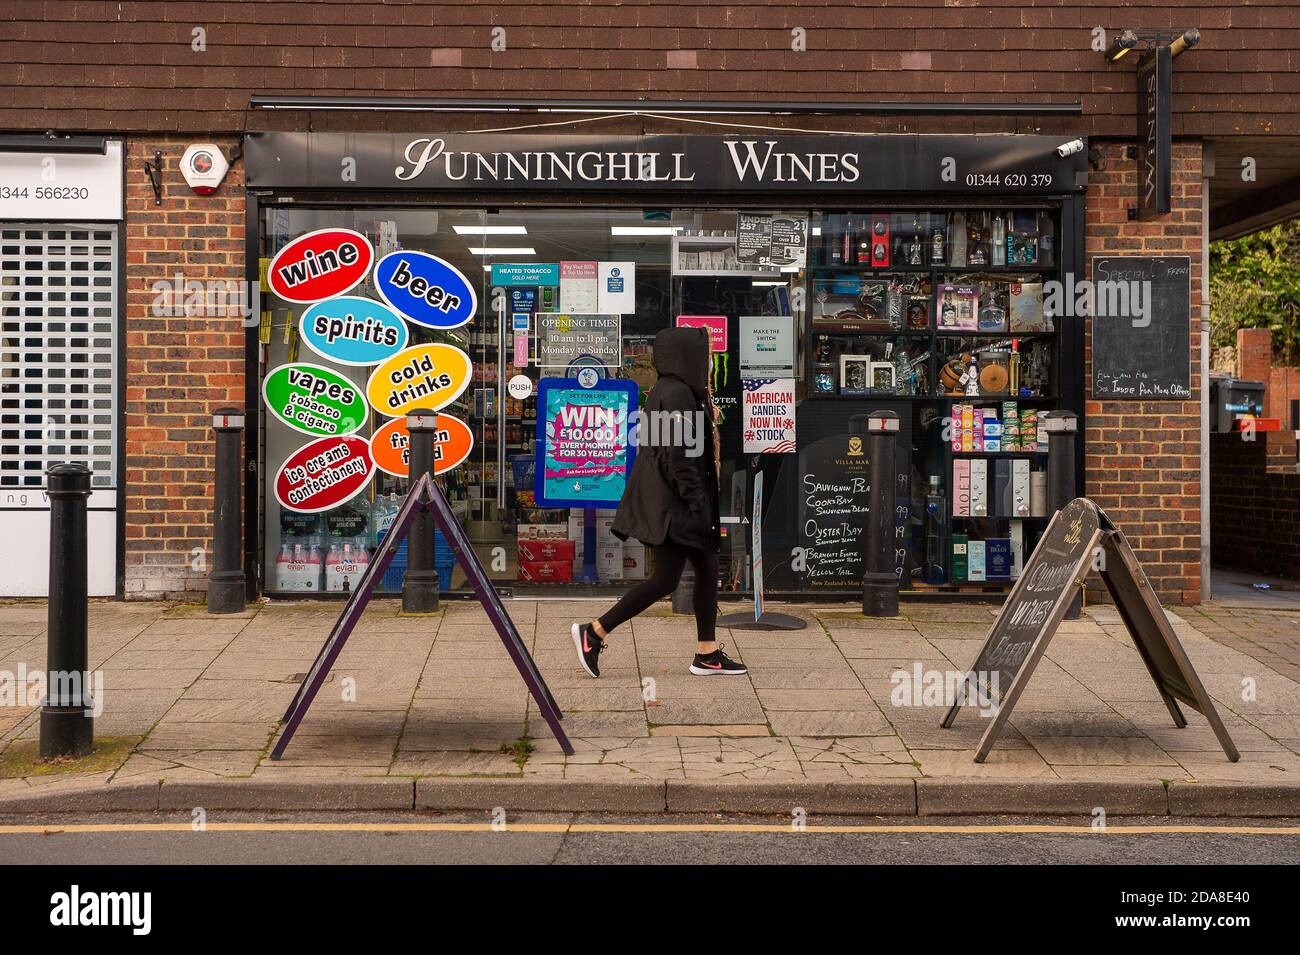 Sunninghill, Berkshire, UK. 10th November, 2020. Off licences are allowed to open by law during the Covid-19 Coronavirus lockdown 2, however, it has been reported that some people are drinking in excess of safe limits during the Covid-19 Pandemic. Credit: Maureen McLean/Alamy Stock Photo